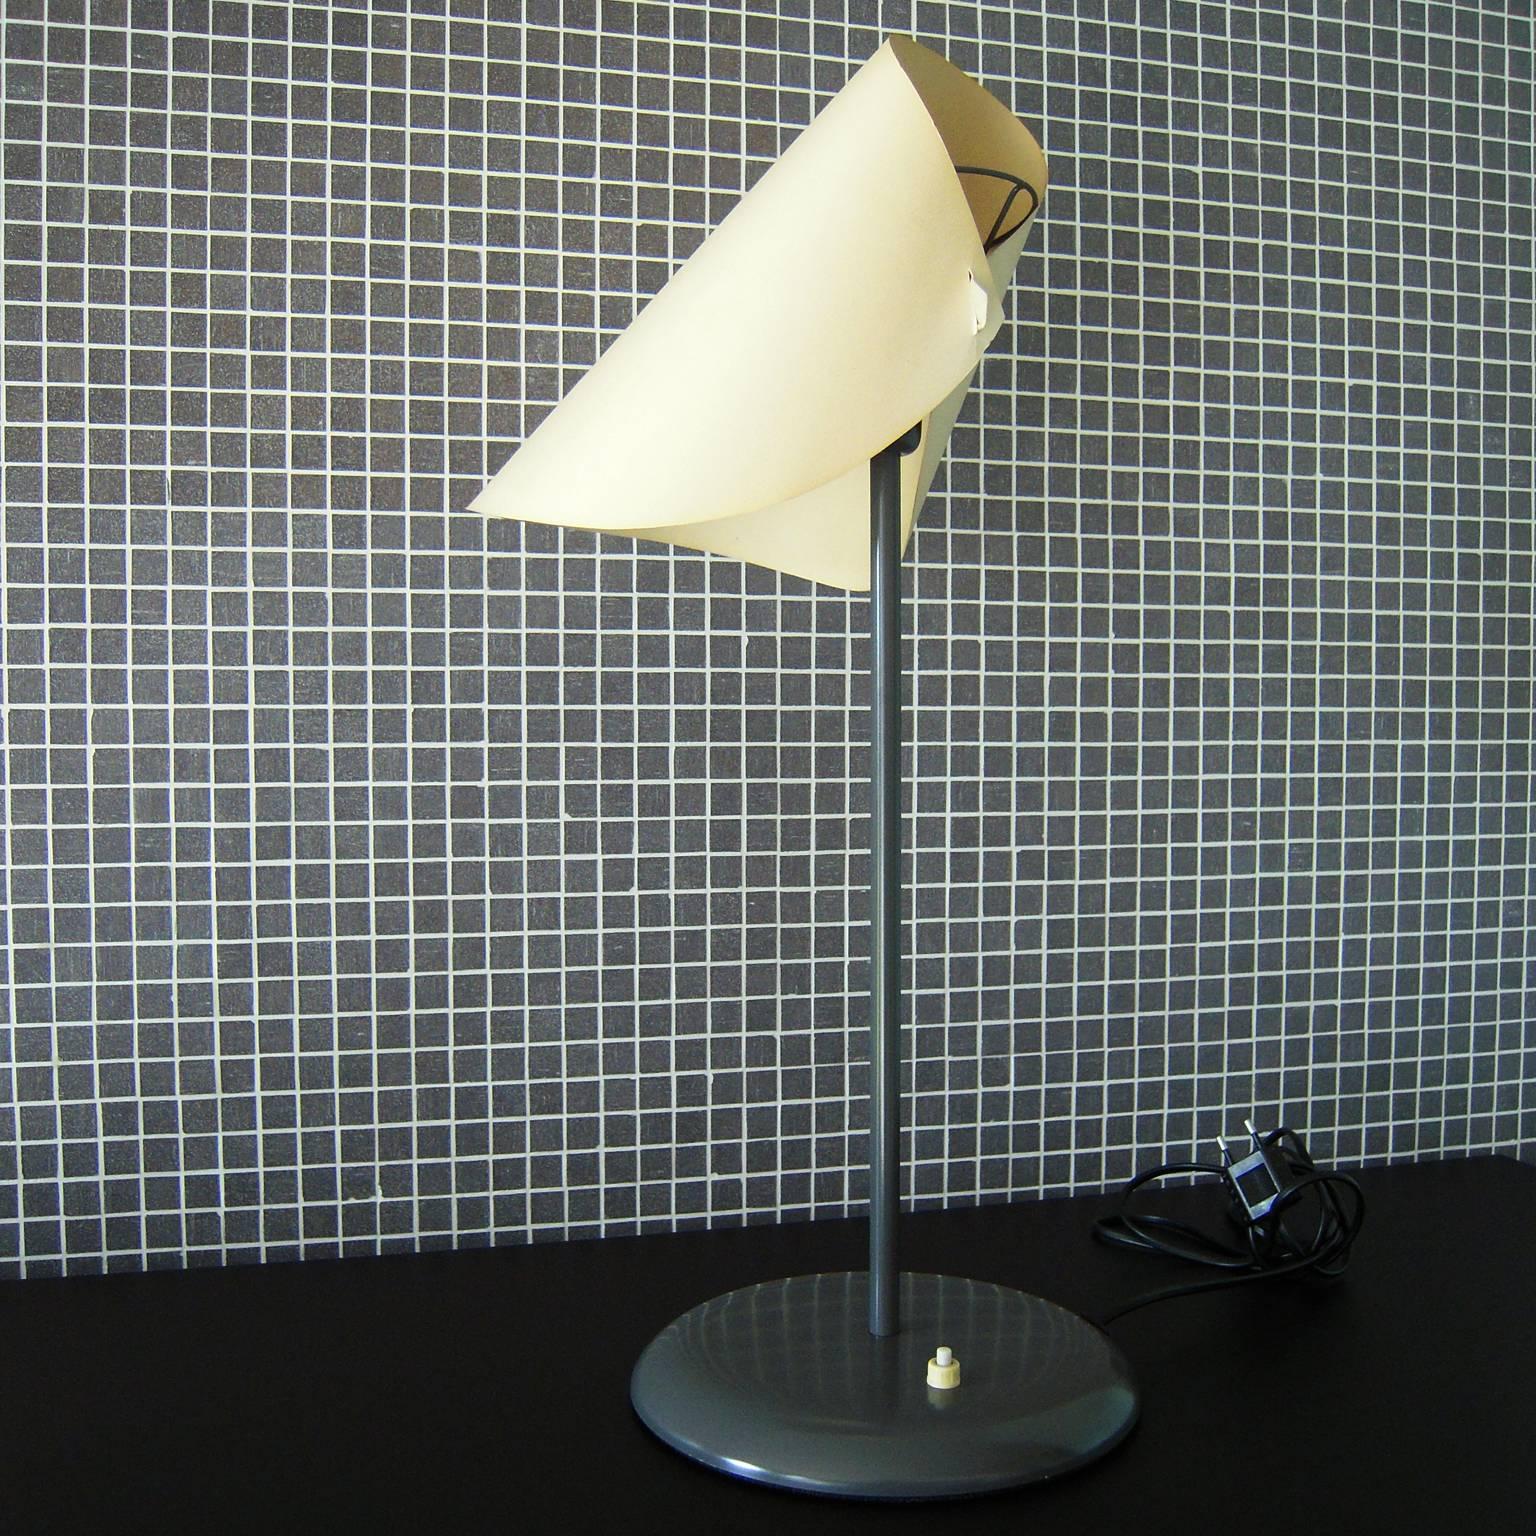 Table lamp designed in 1973 by Man Ray for Sirrah/ Dino Gavina.
The lamp is in grey painted metal with a adjustable diffuser in white composite material.

The item price doesn't includes packing and shipping cost.
